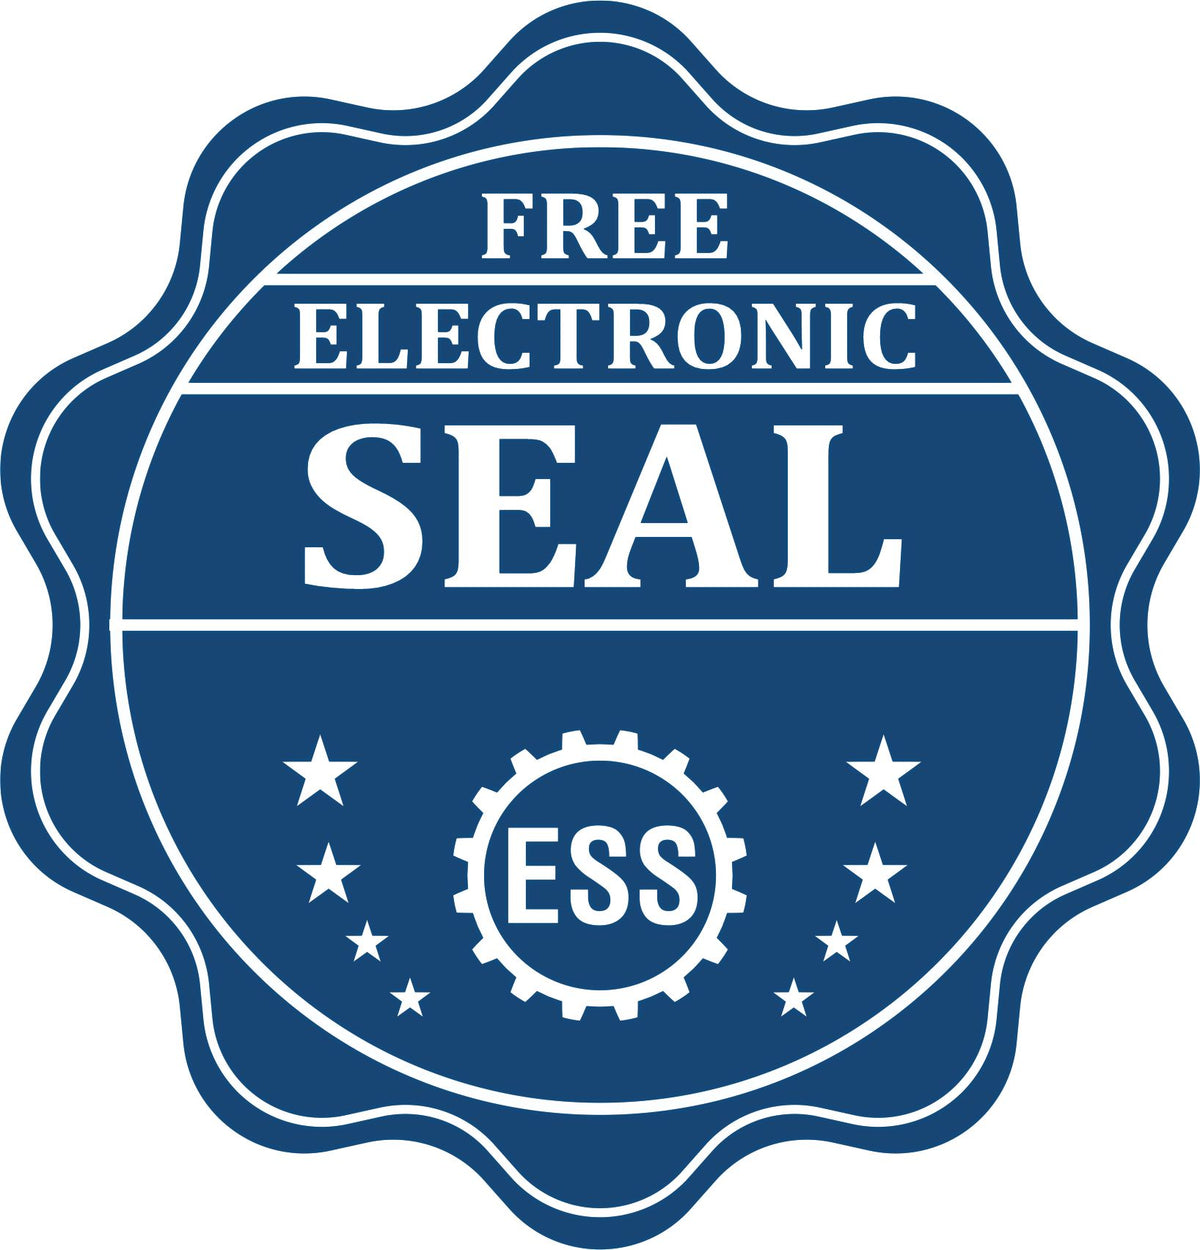 A badge showing a free electronic seal for the Gift New Mexico Architect Seal with stars and the ESS gear on the emblem.